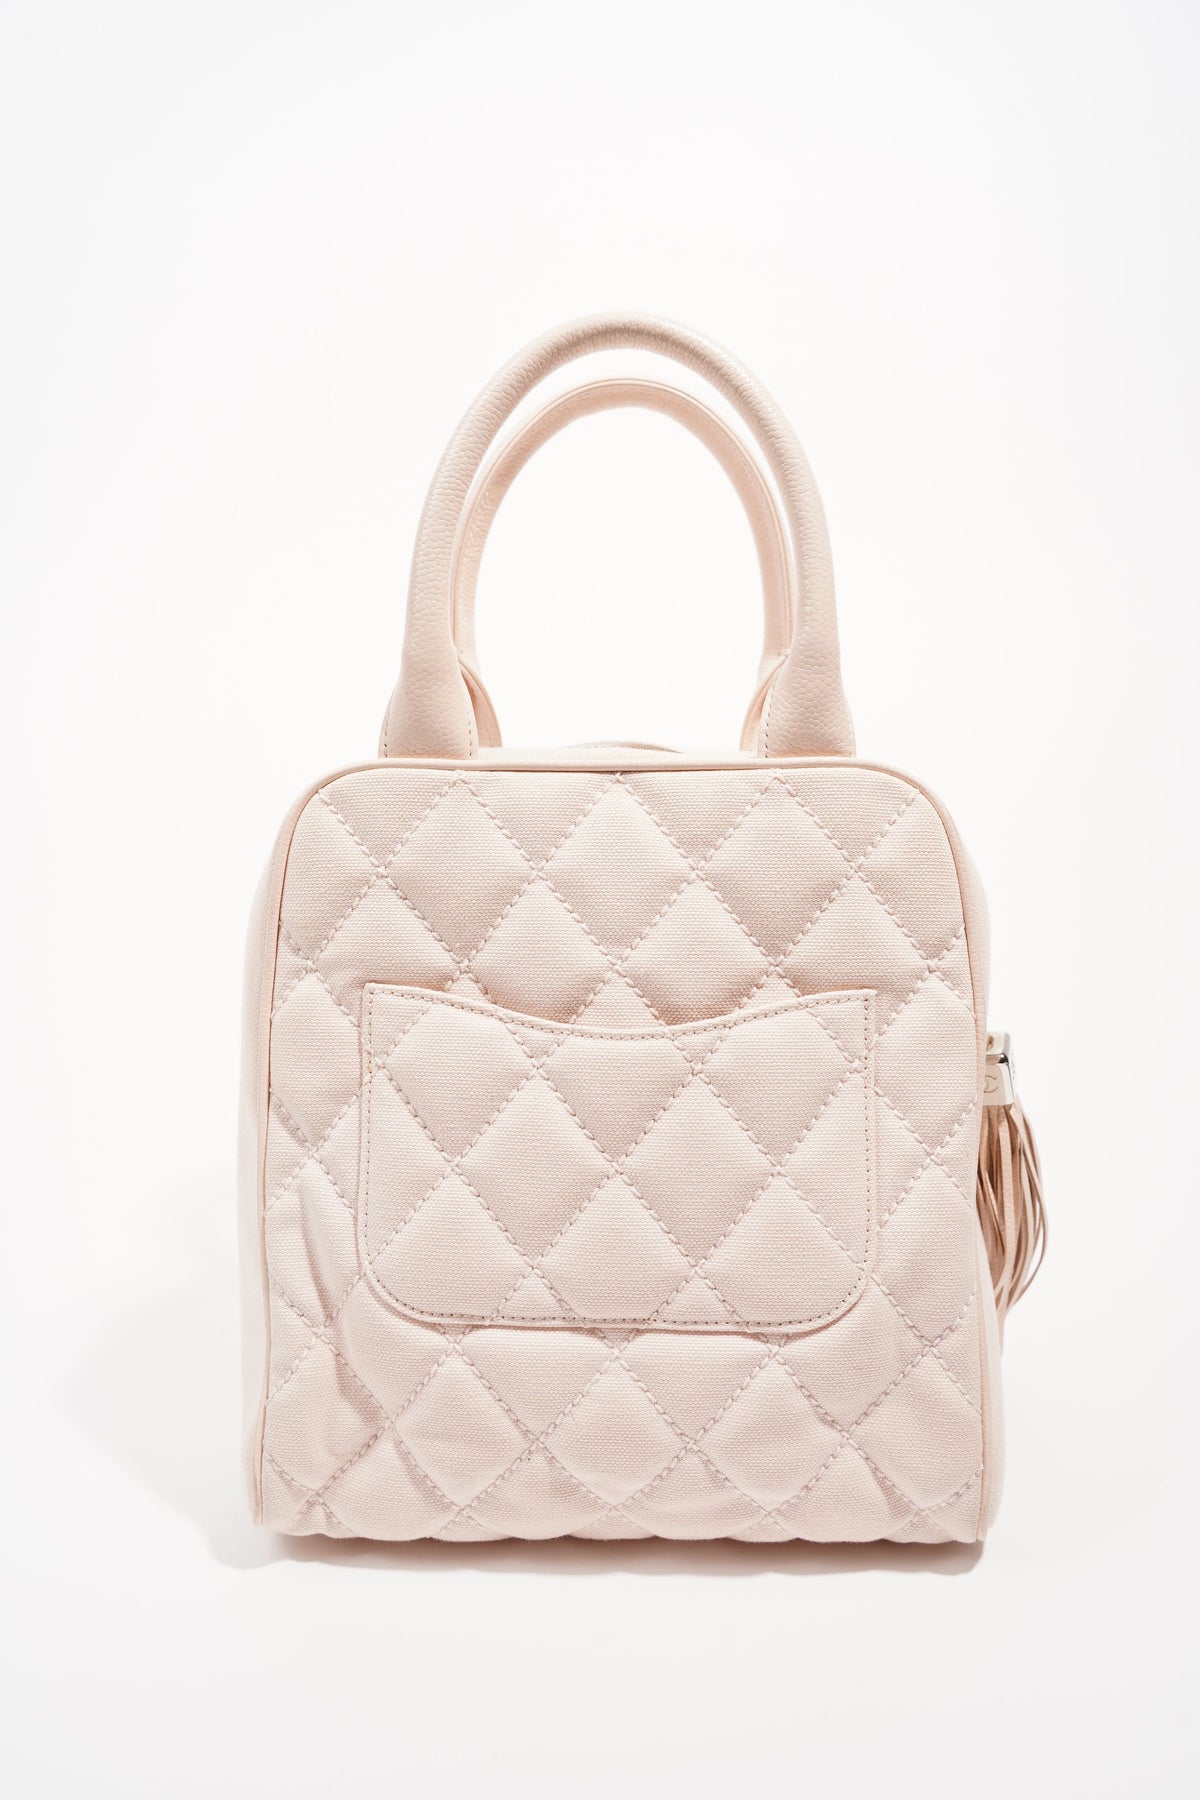 Auth-CHANEL-Matelasse-Lamb-Skin-Small-Hobo-Shoulder-Bag-Pink-AS3917-Used-F/S